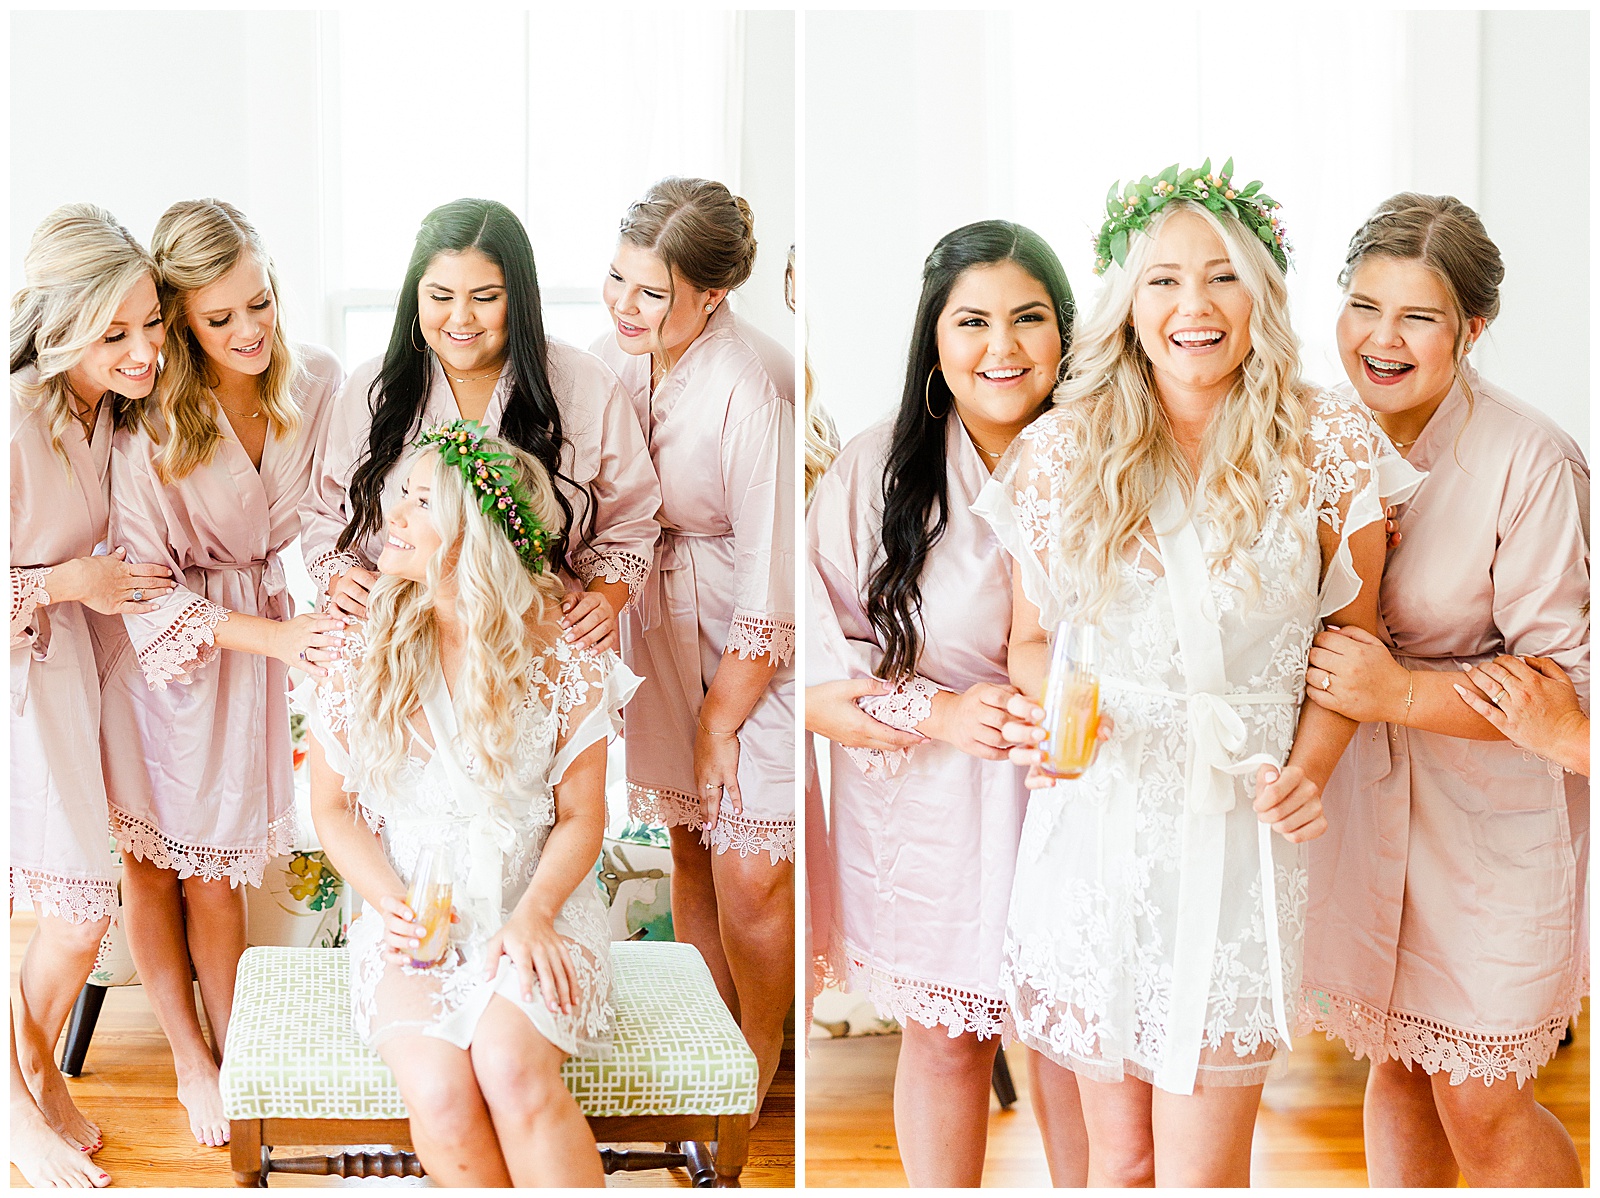 Bride Tribe with Matching Pink Robes - Bright Boho Chic Theme in Charlotte, North Carolina | check out the full wedding at KevynDixonPhoto.com